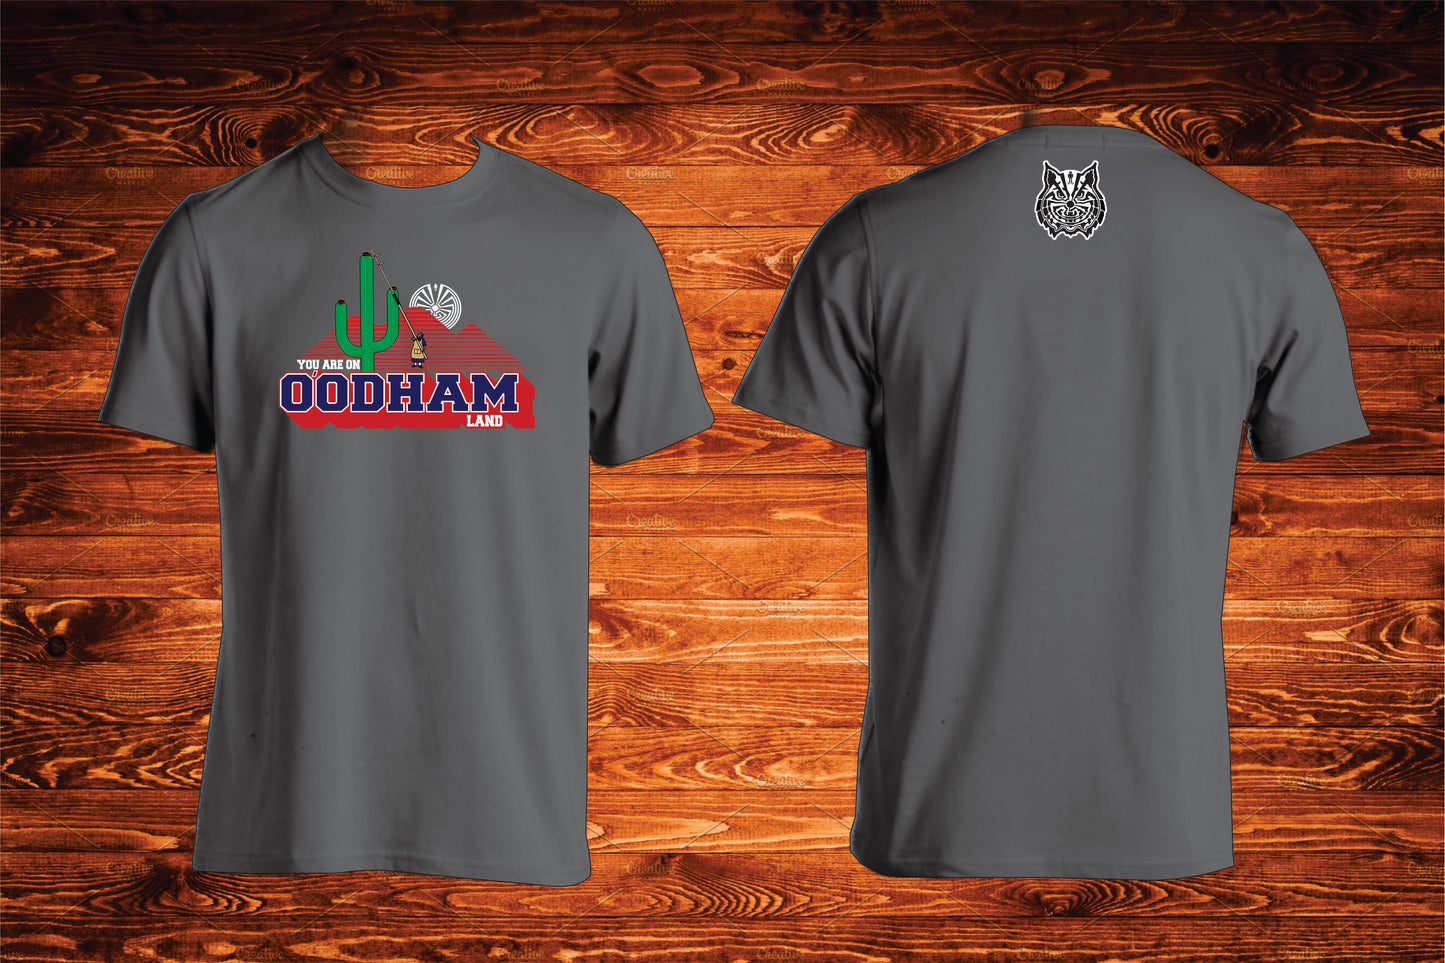 You Are On O'odham Land T-shirt Design by True Descendants Trading Company